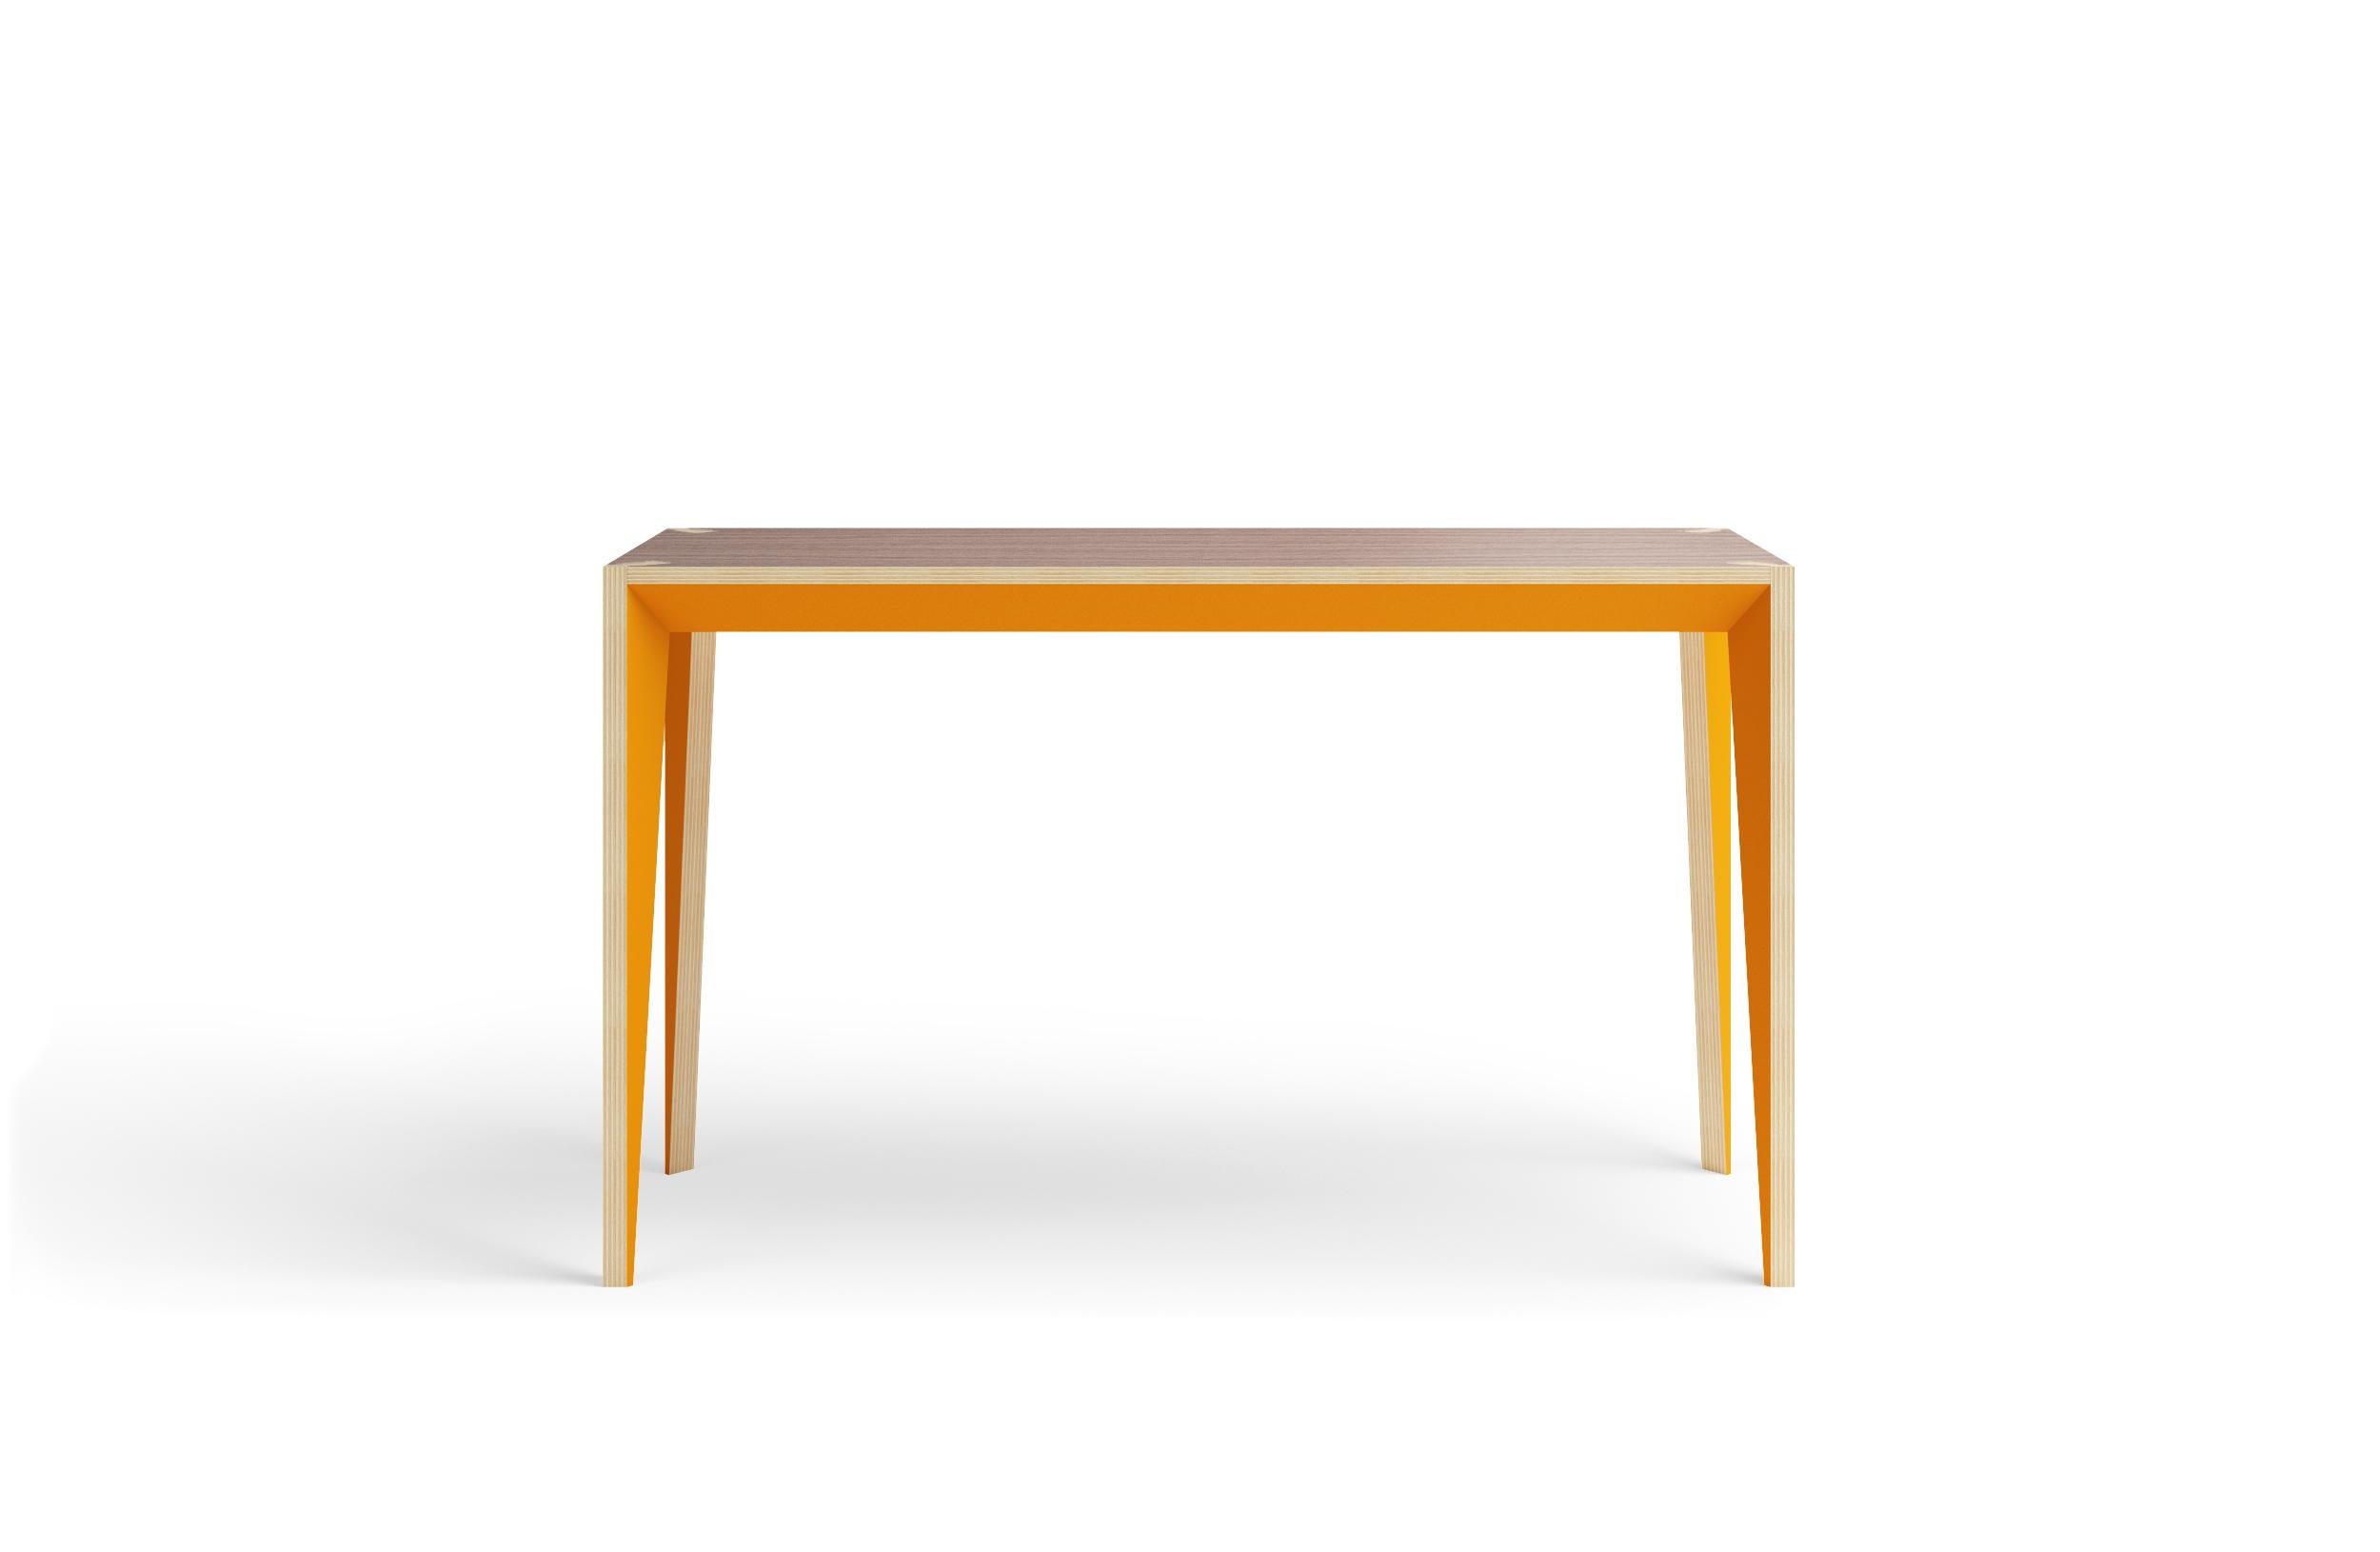 Merging clean lines with warm materials, the faceted geometry of the MiMi console table creates a slender, elegant profile punctuated with painted surfaces that capture light. This modern and graceful design looks great from all angles and can also